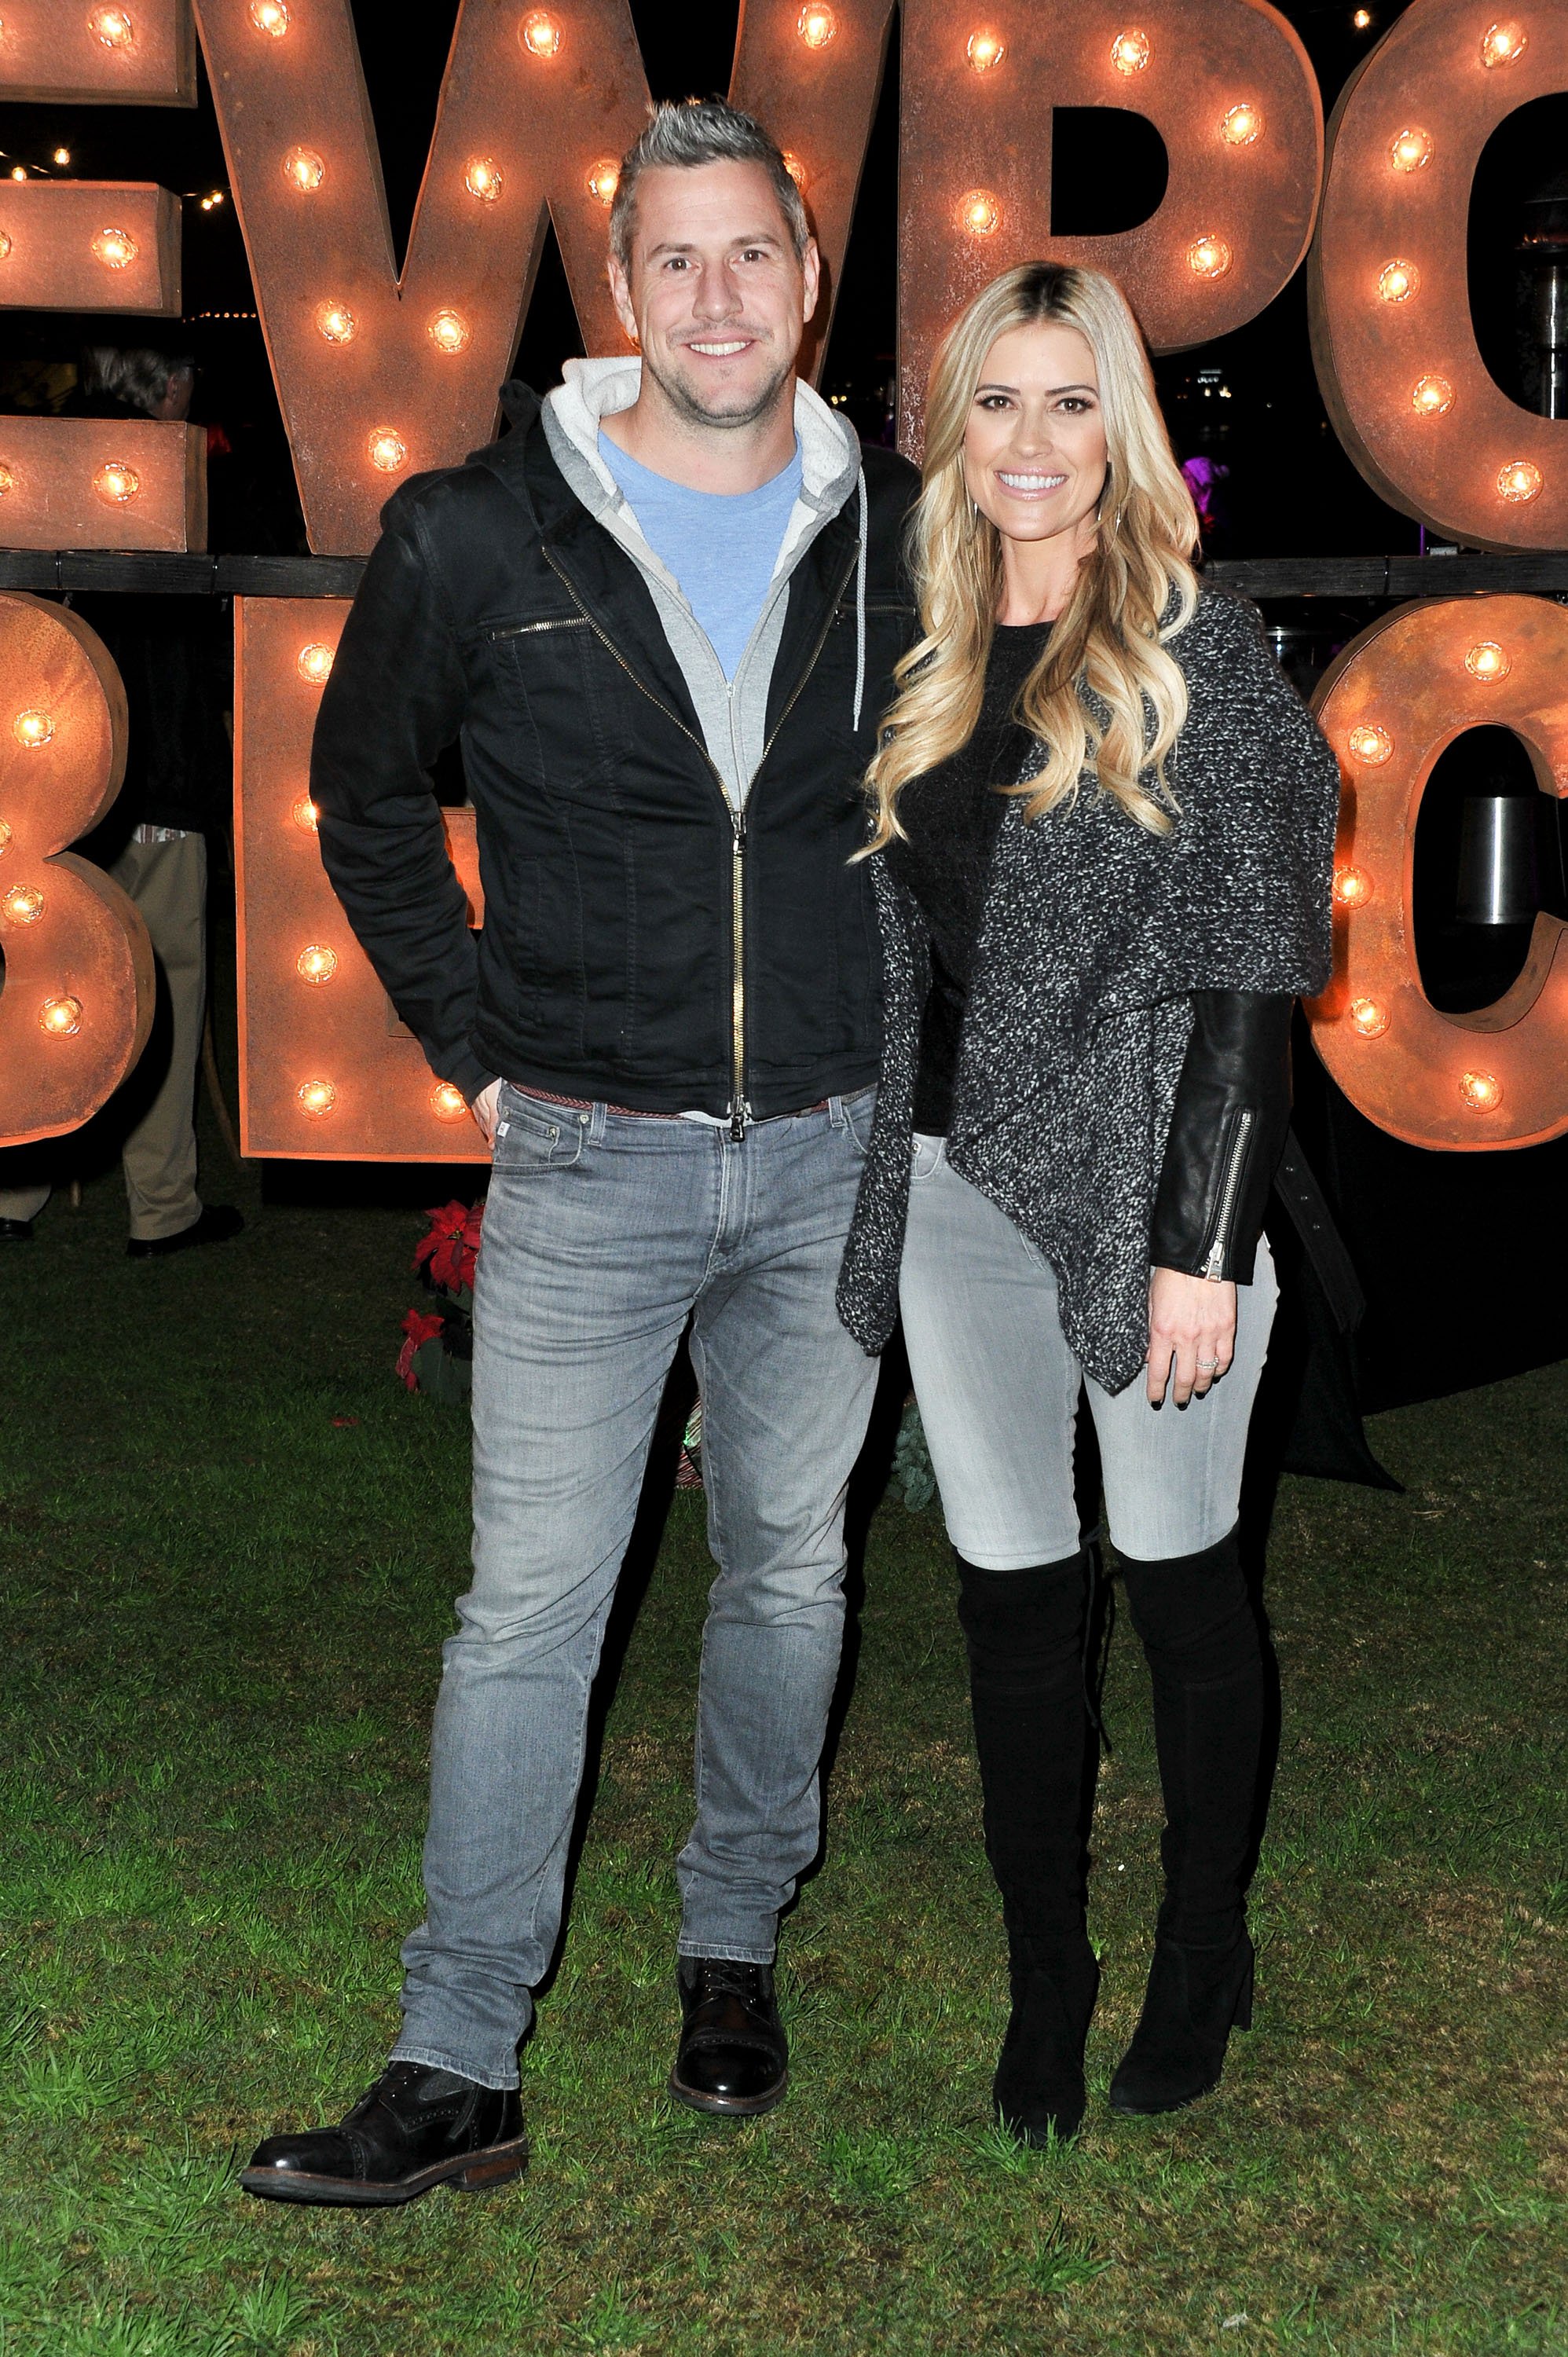 Ant Anstead and Christina Anstead attend the Newport Beach Christmas Boat Parade in Newport Beach, California on December 18, 2019 | Photo: Getty Images